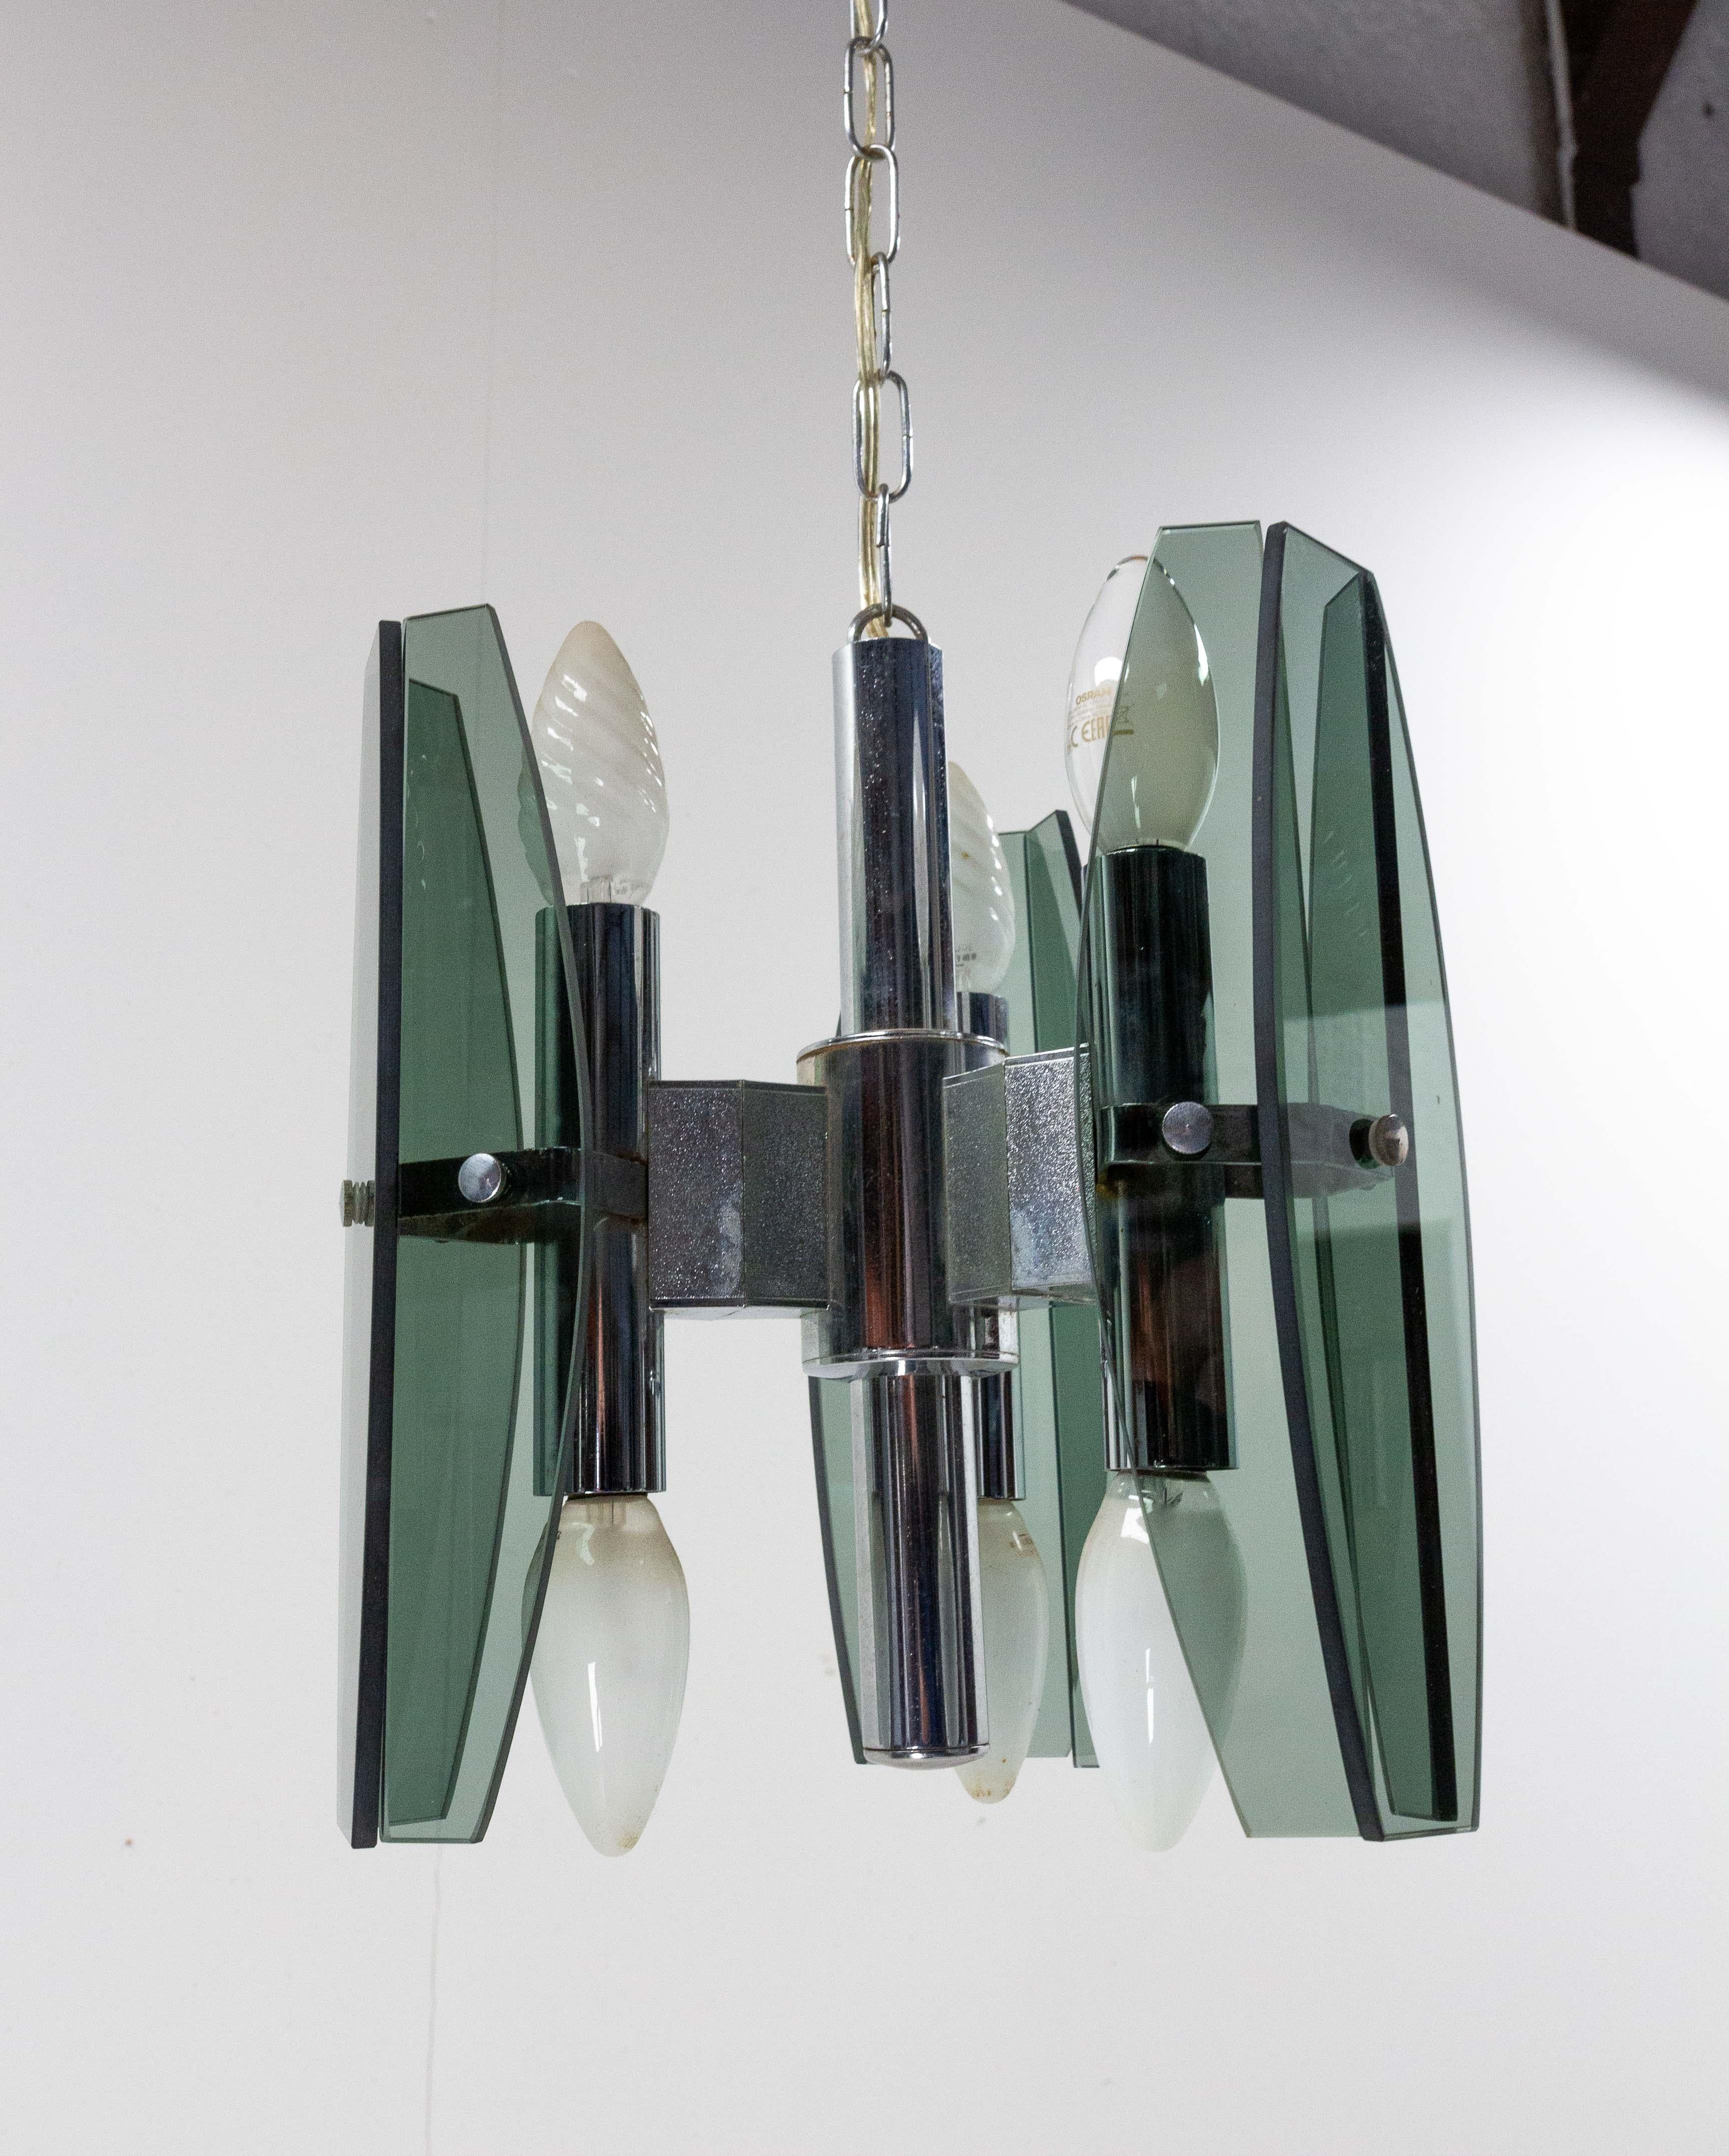 Ceiling pendant, France mid-century
Lustre in metal and glass
Chandelier with six lights
This chandelier is conform to USA and EU or UK standards
Good condition

Shipping : 
L24,5 P24,5 H30 2,5 kg.